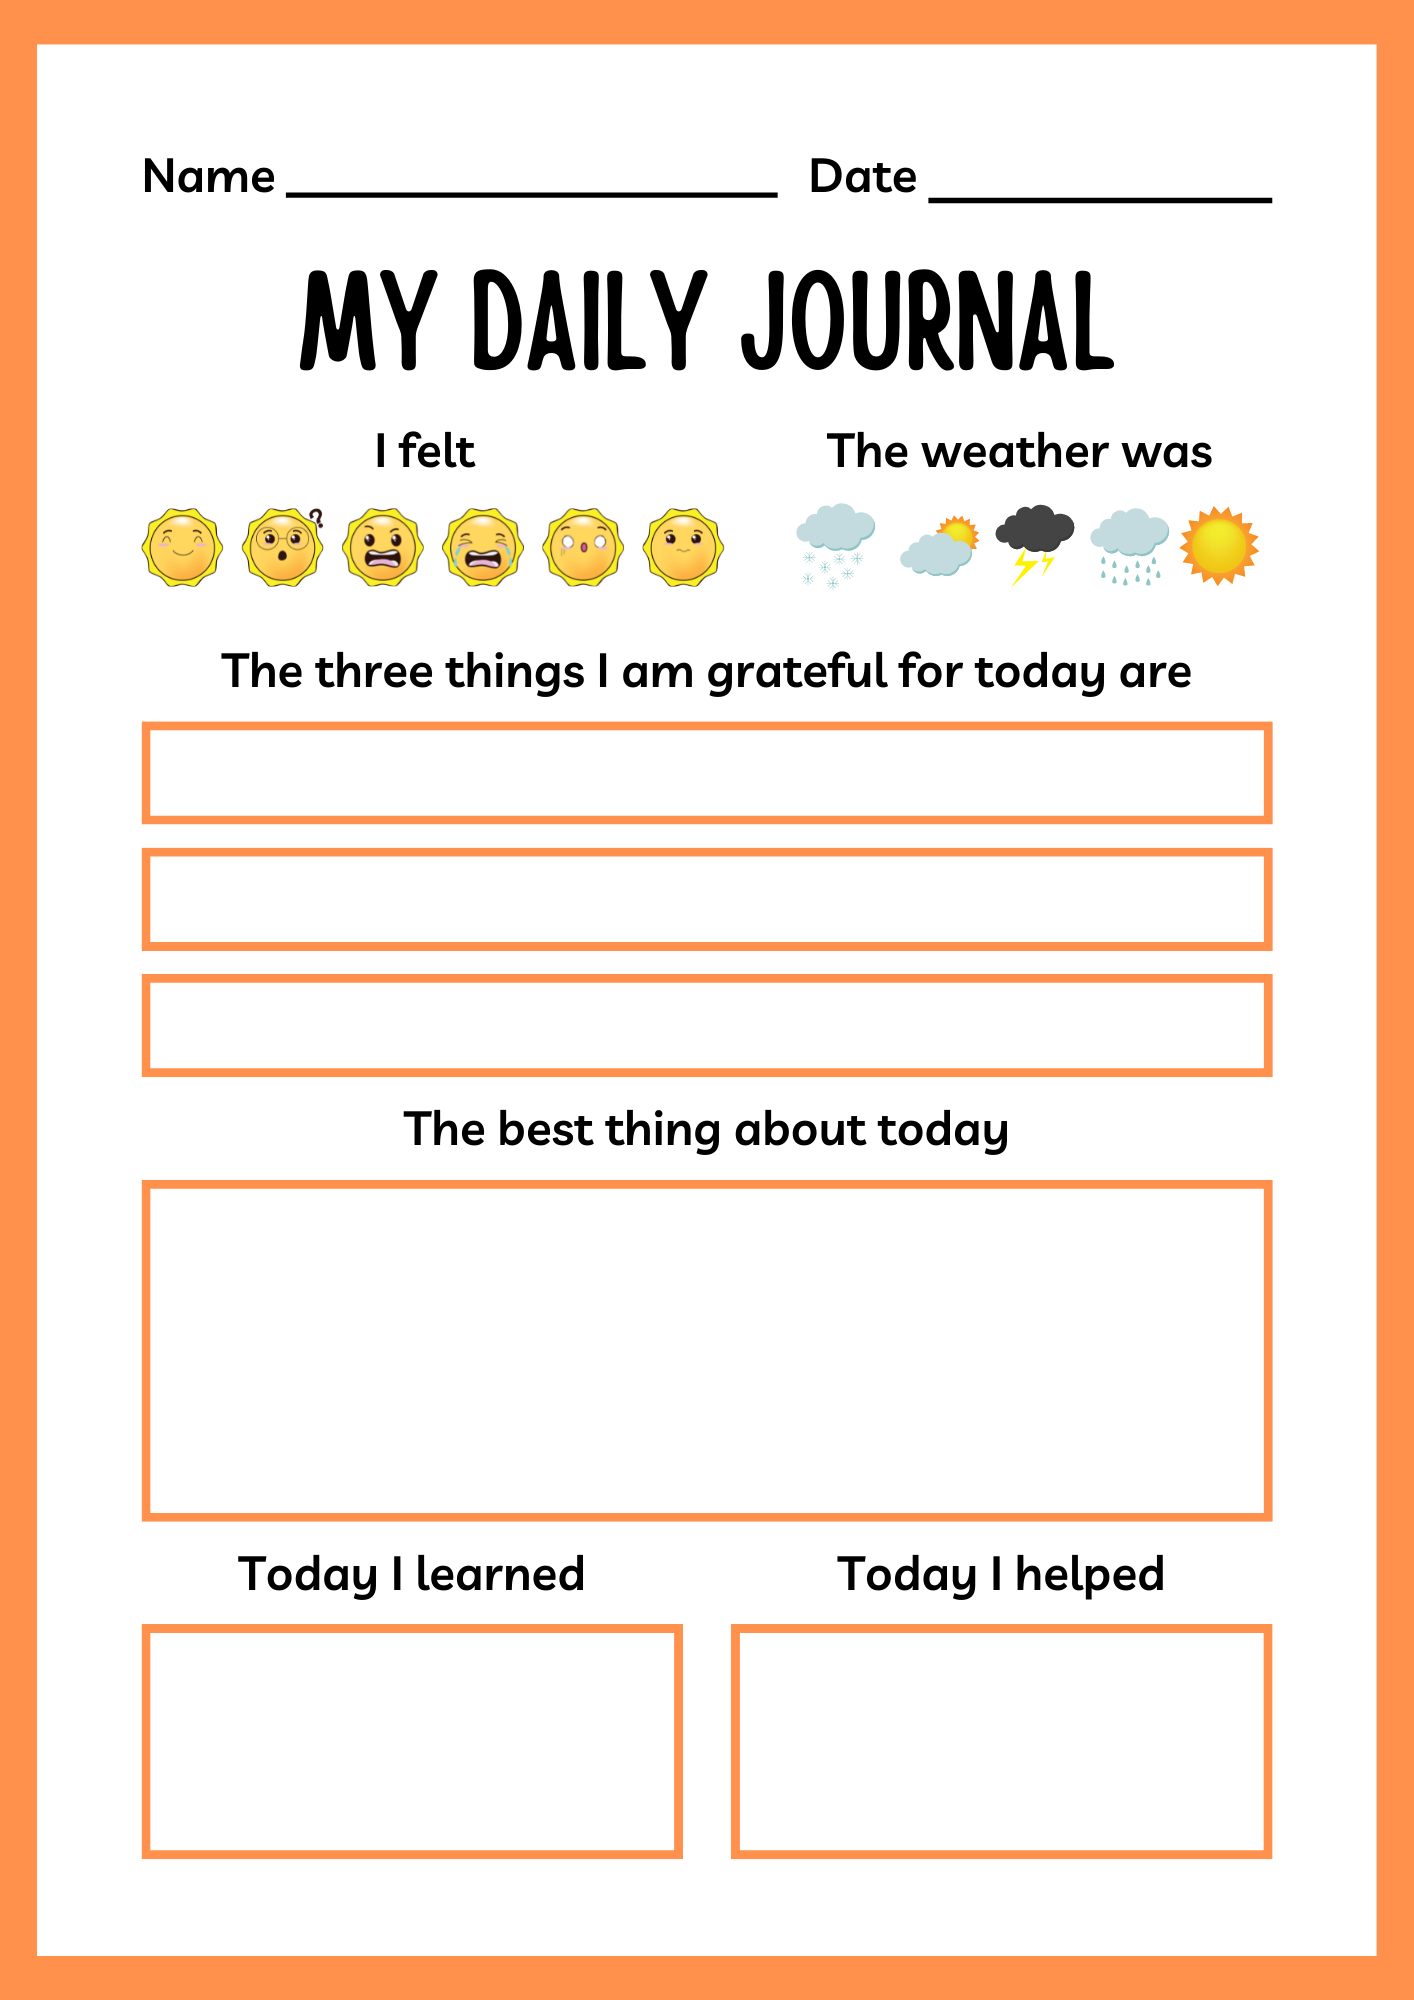 Learn How To Journal - Benefits And Printable Sheet Included